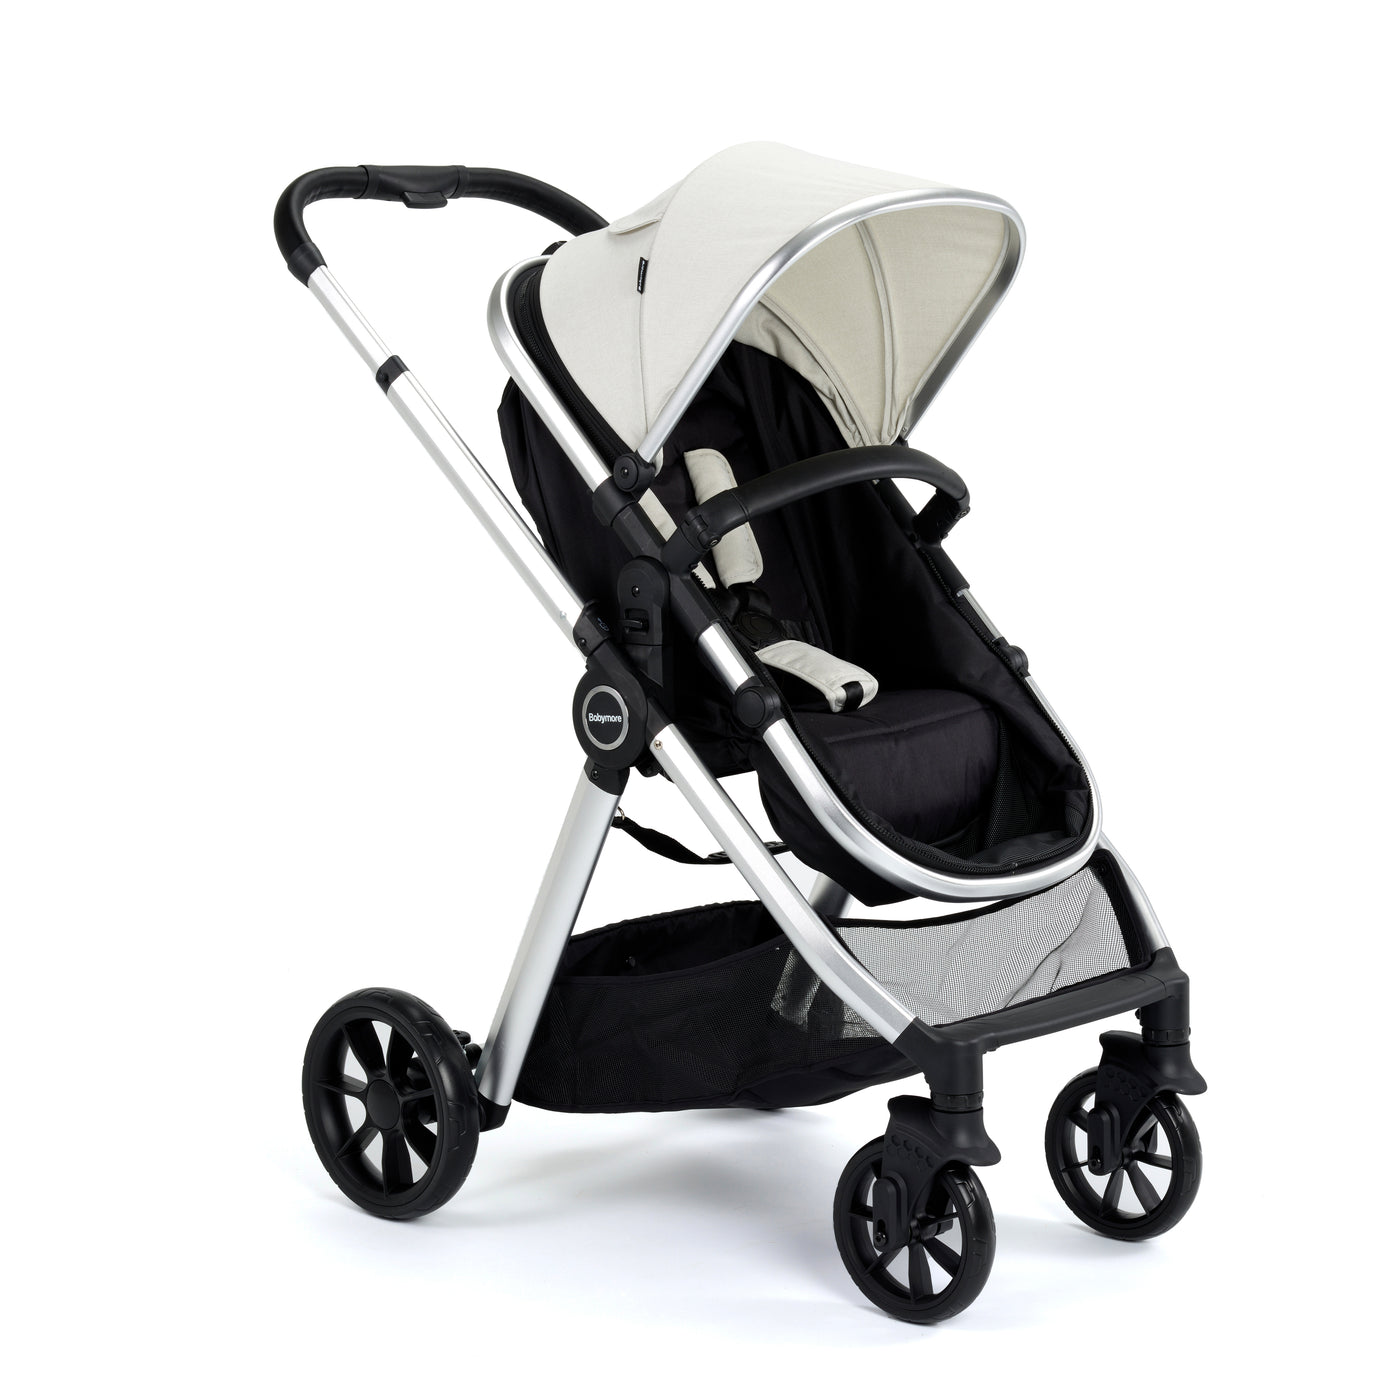 Mimi Travel System Coco I-Size Care Seat with Isofix Base